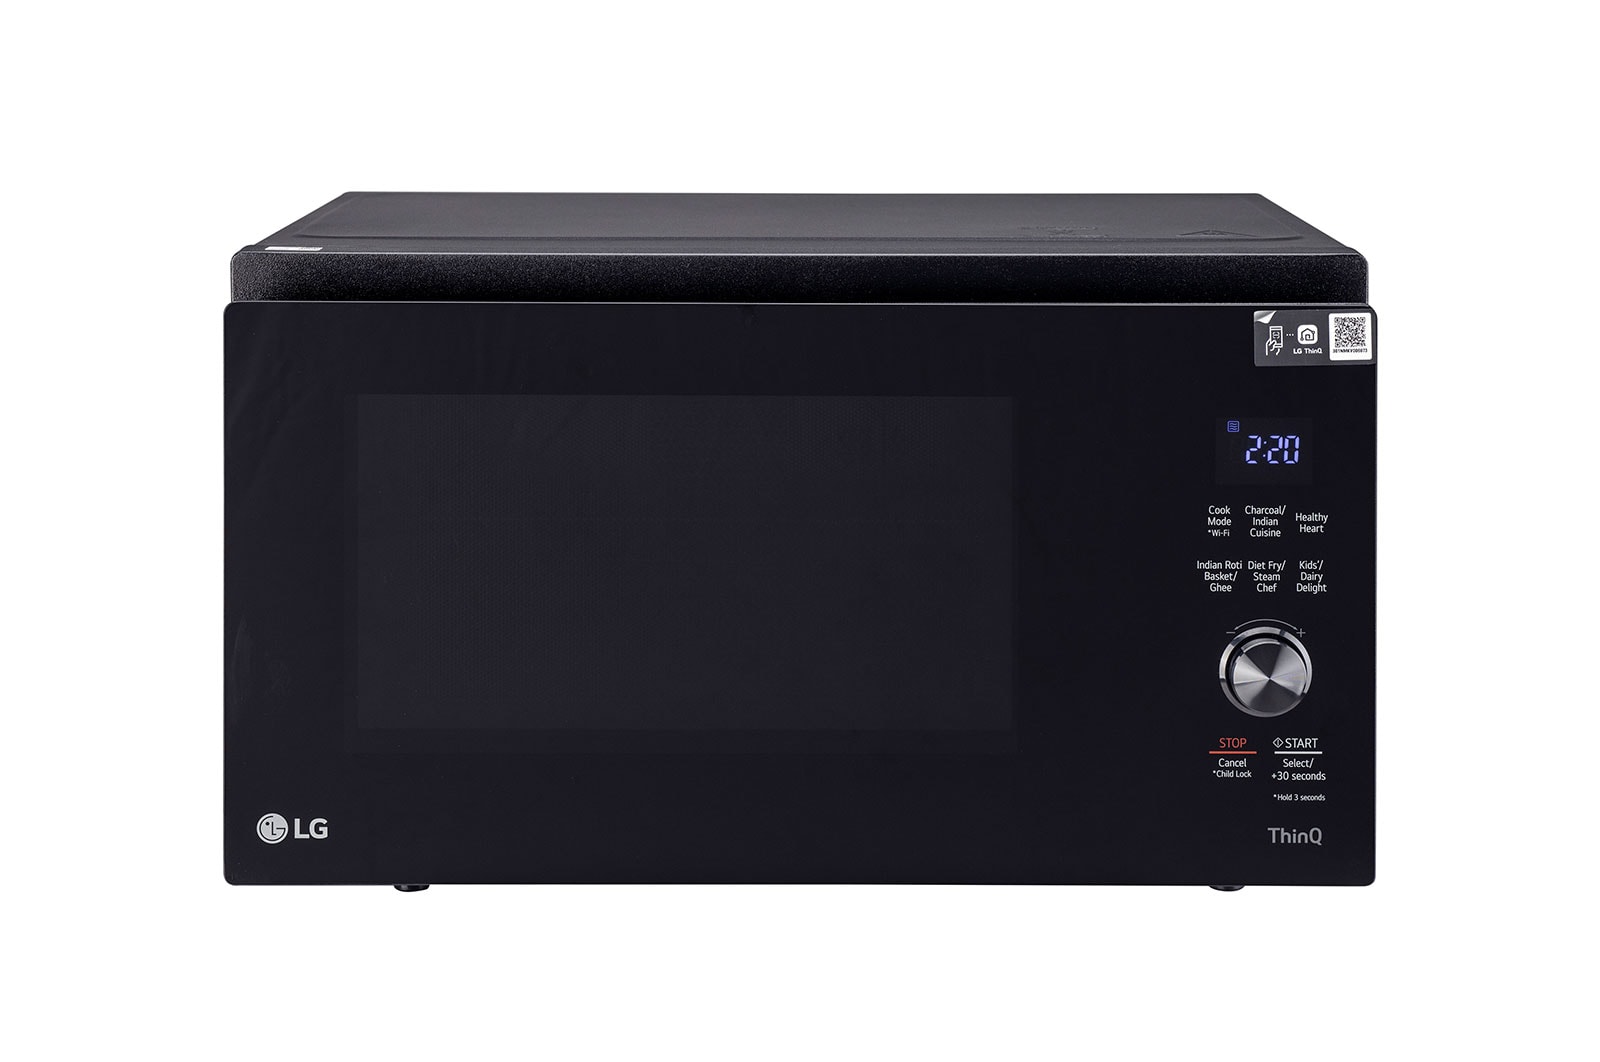 LG 32L WiFi Enabled Charcoal Microwave Oven (MJEN326SFW, Black